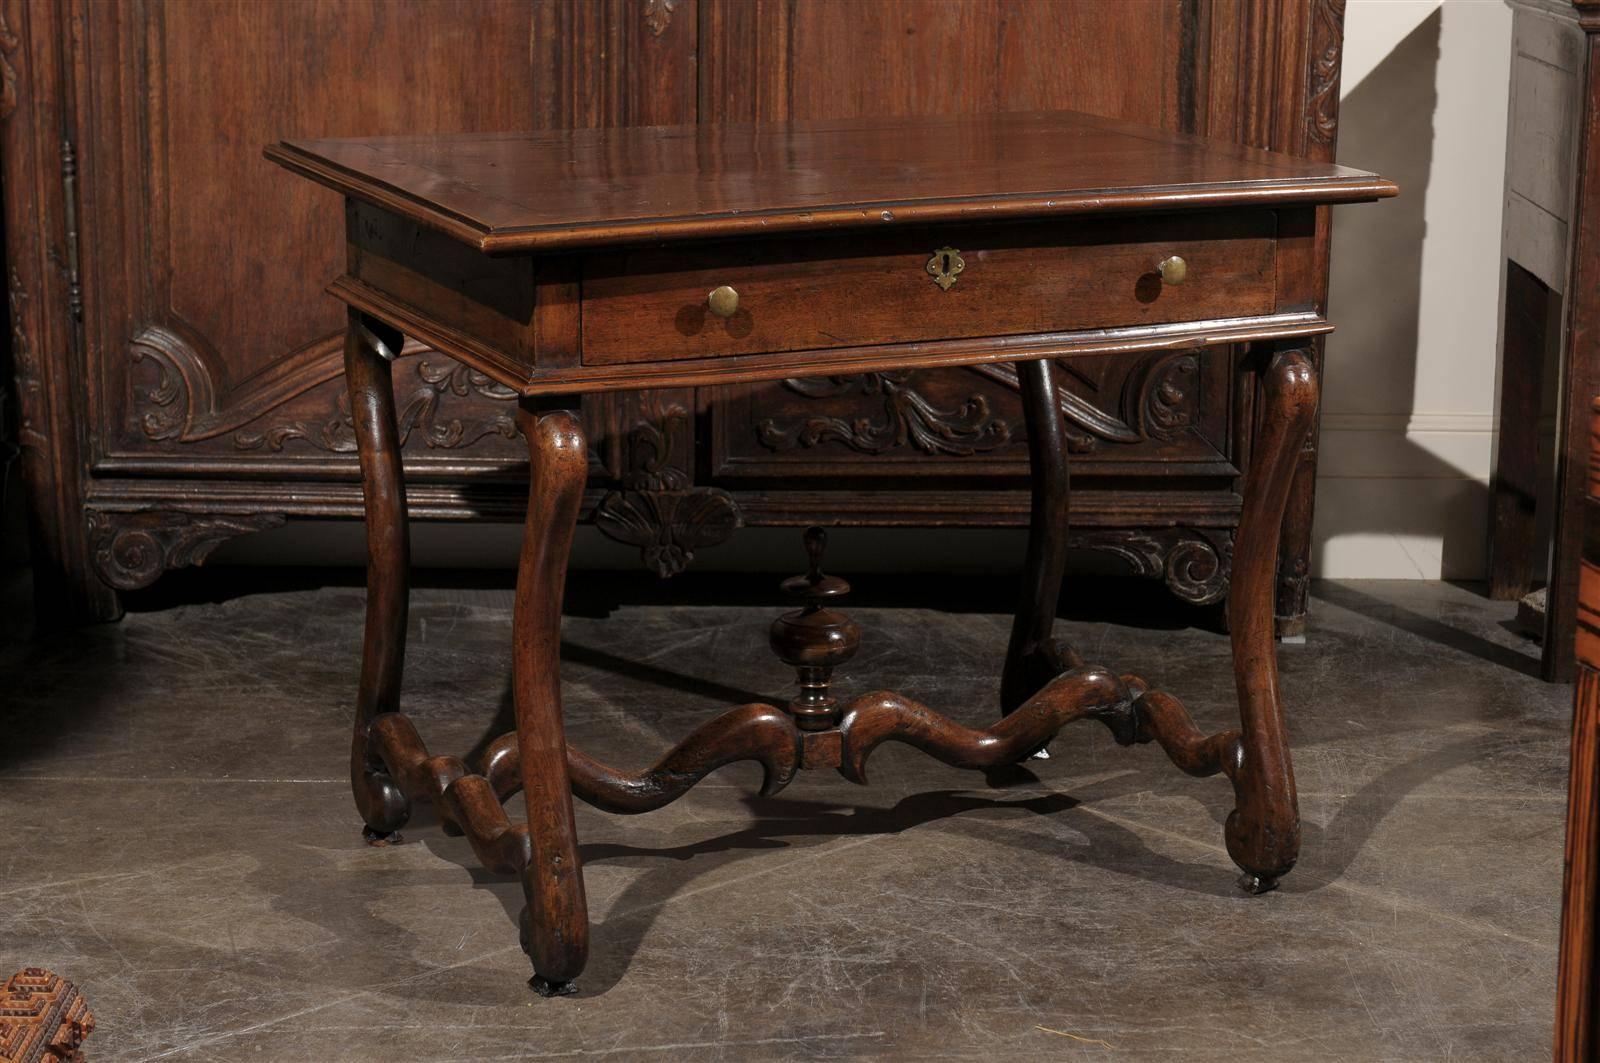 A French mid-19th century walnut side table. This French table from circa 1860 features a rectangular top over a single frontal dovetailed drawer with brass pulls. The table is raised on two lyre shaped legs, connected to each other by an